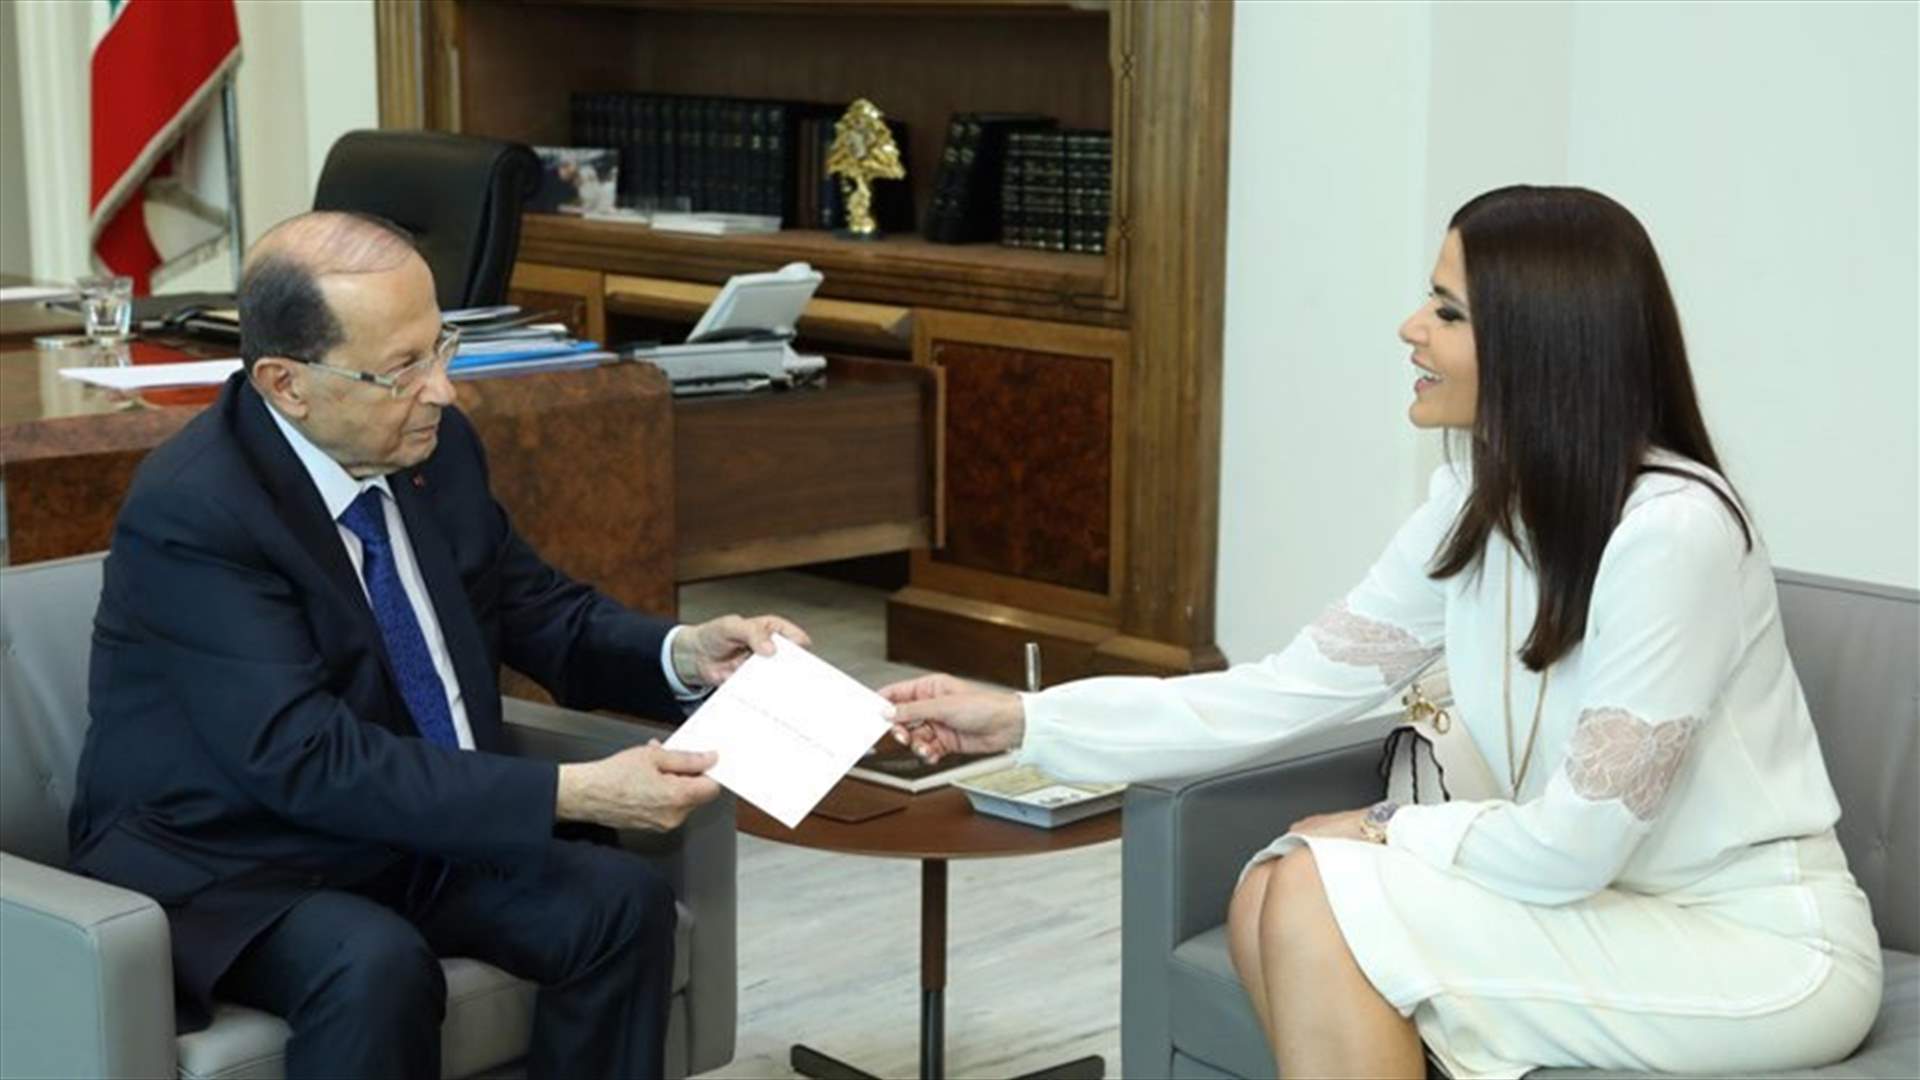 MP Geagea meets with President Aoun, invites him to attend Cedars Festival opening